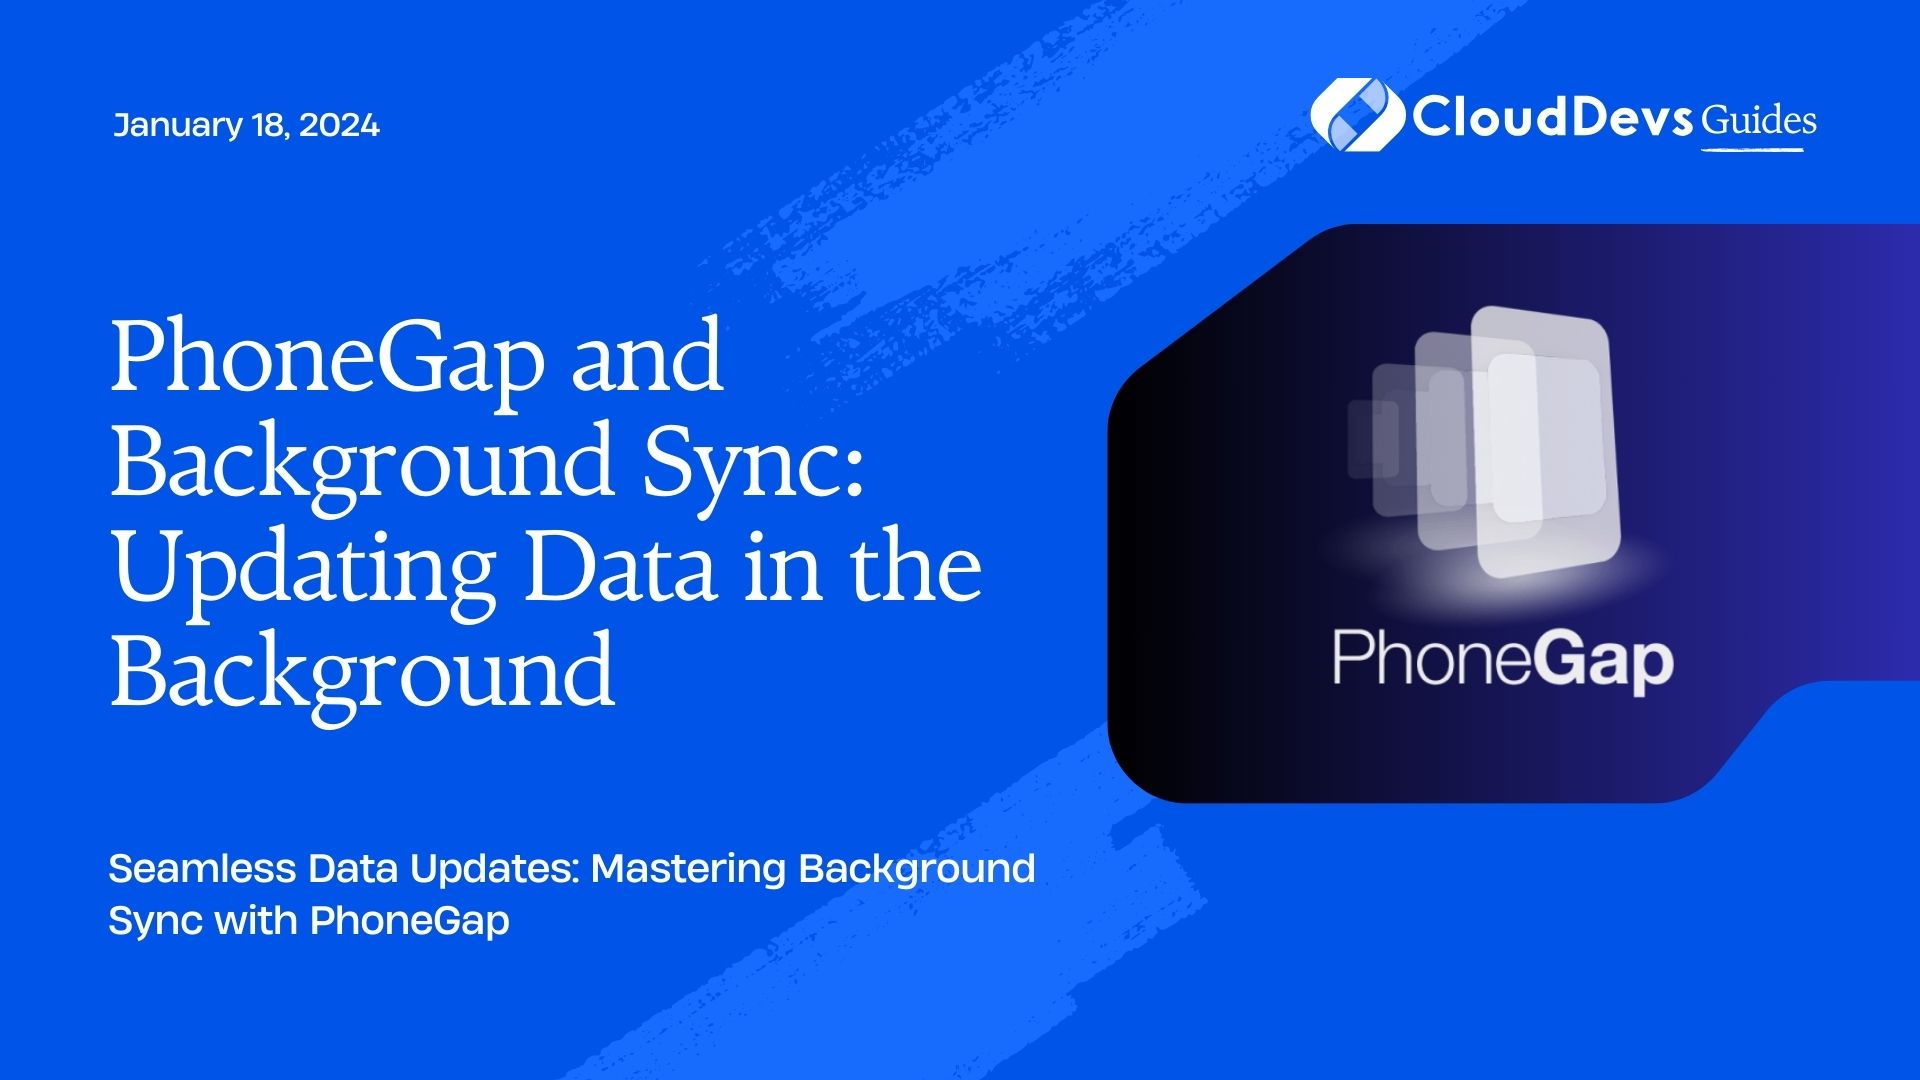 PhoneGap and Background Sync: Updating Data in the Background